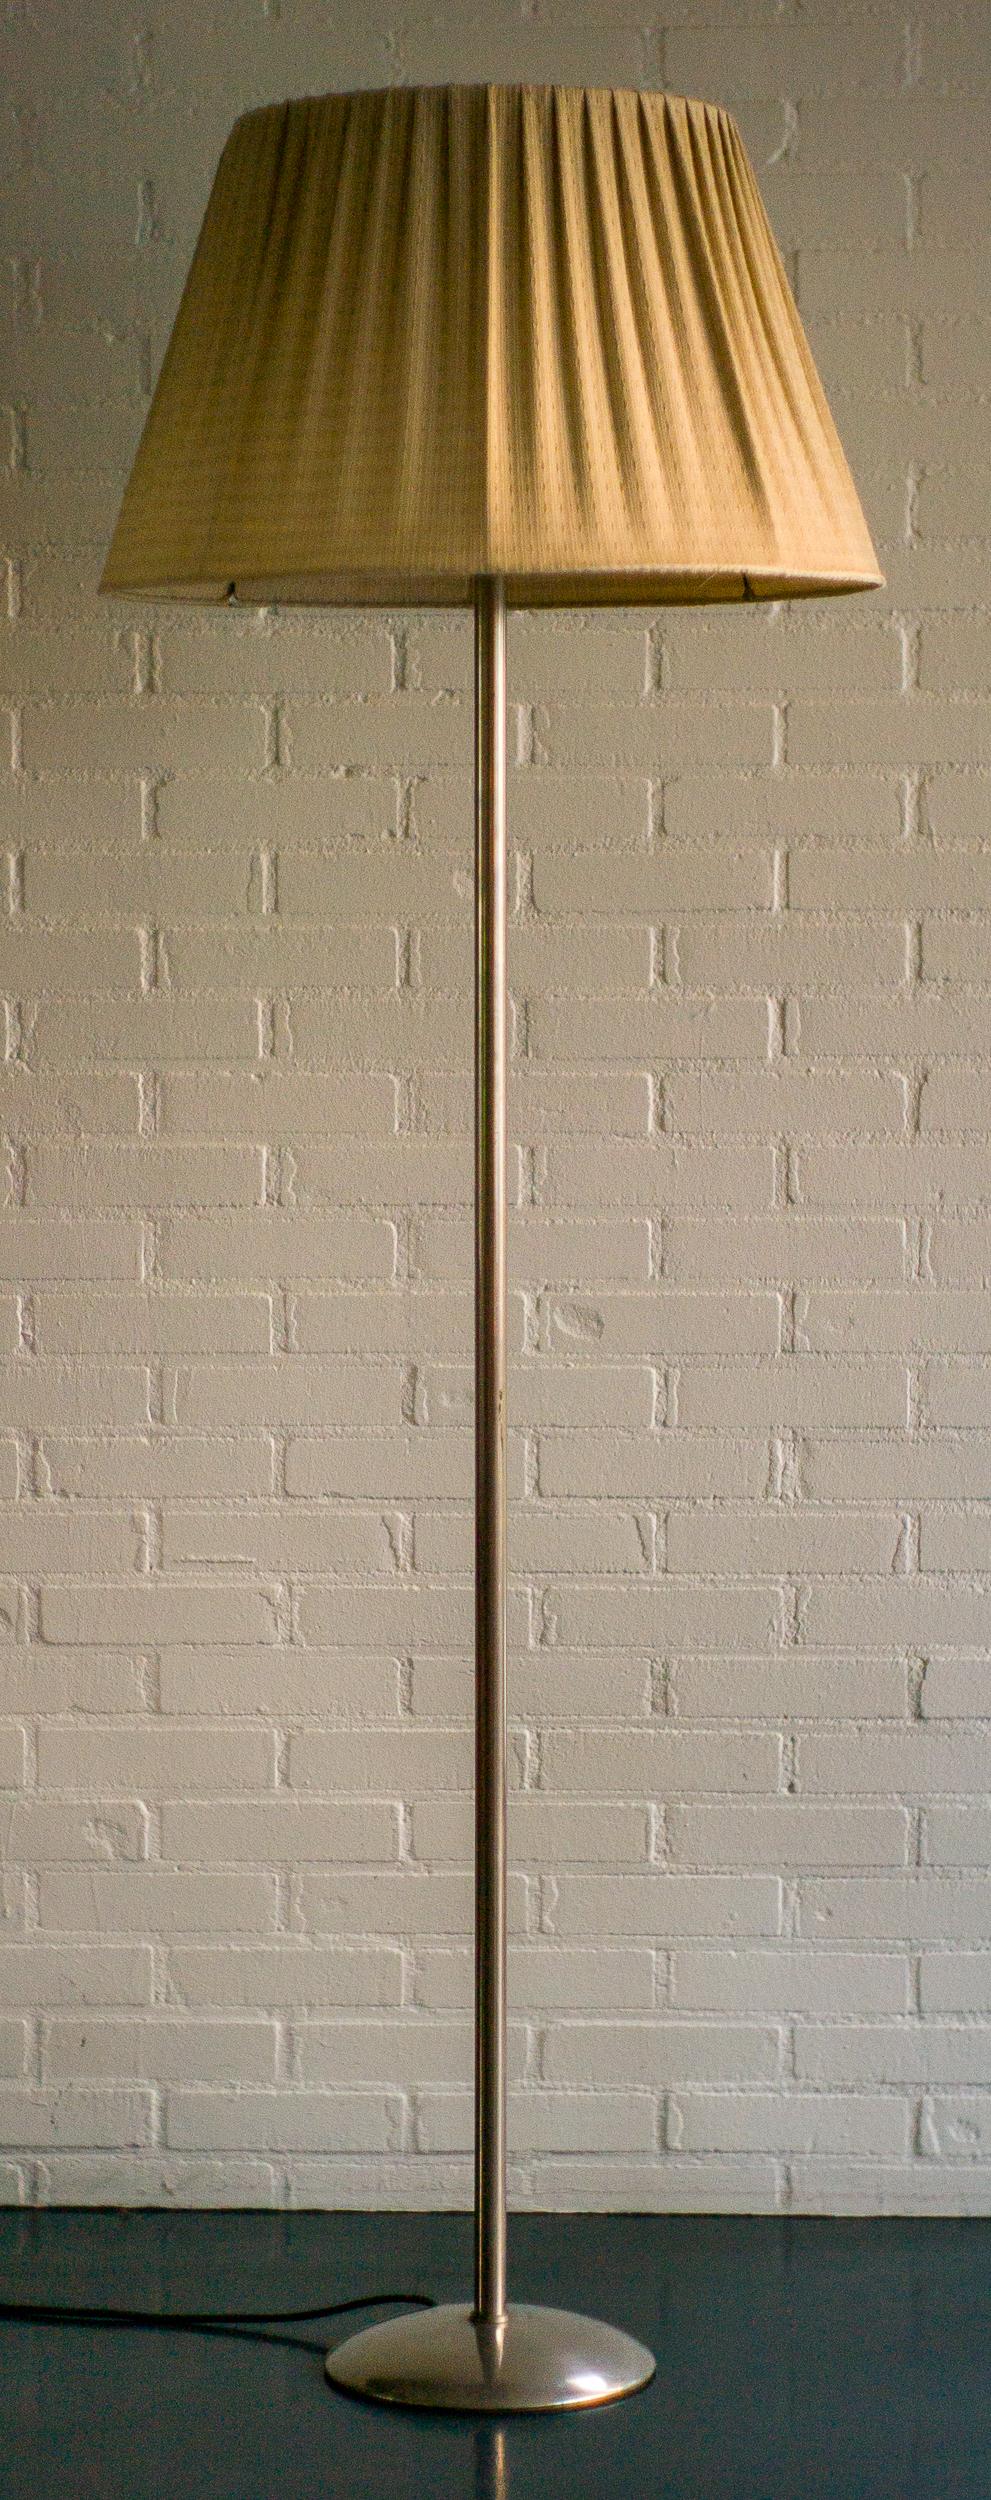 Modernist nickel-plated steel floor lamp with the original fabric shade.
The lamp has one uplighter and two lamps shining down.
Both the uplighter and the two downward lights have a separate light switch.
In wonderful all original